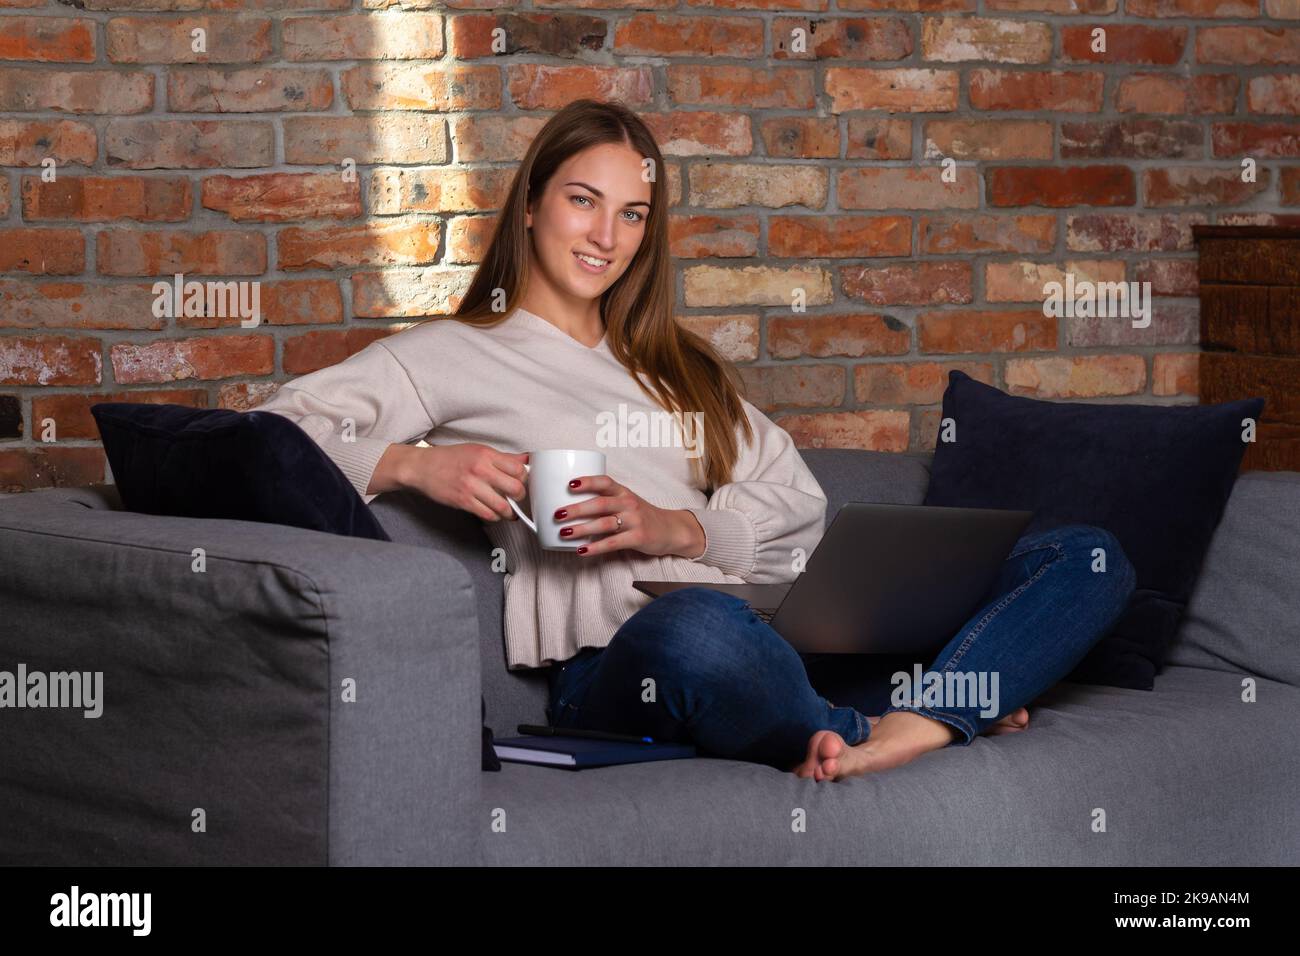 Smiling woman in a white sweater holding a white cup with a laptop in her lap and a notebook on the side Stock Photo